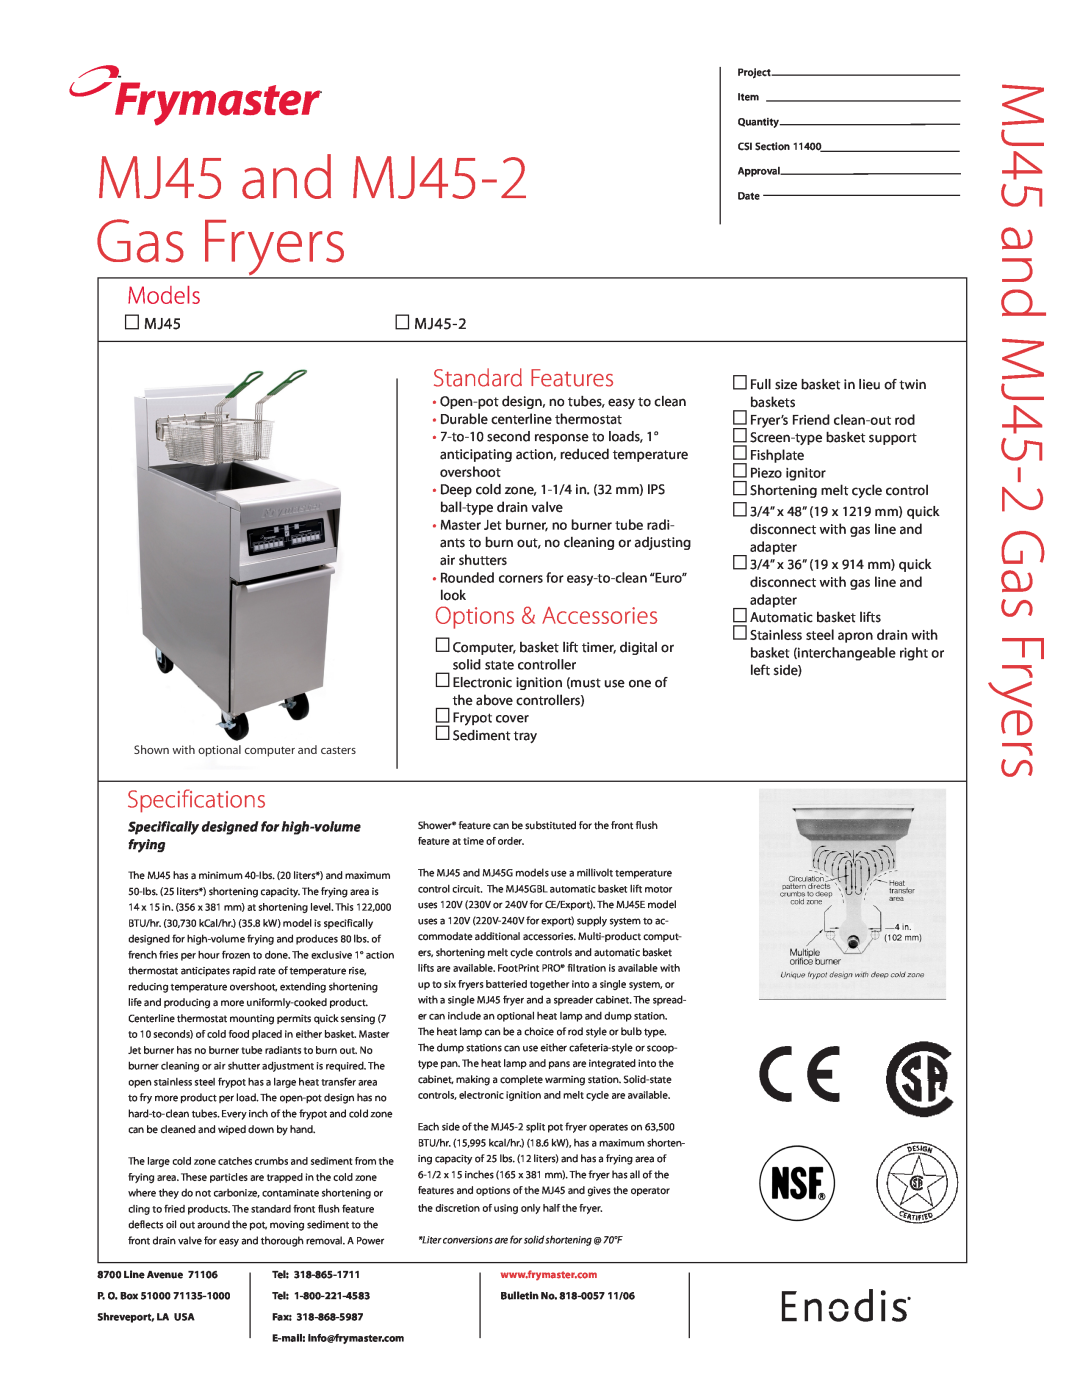 Frymaster specifications Frymaster, MJ45 and MJ45-2 Gas Fryers, Models, Standard Features, Options & Accessories 